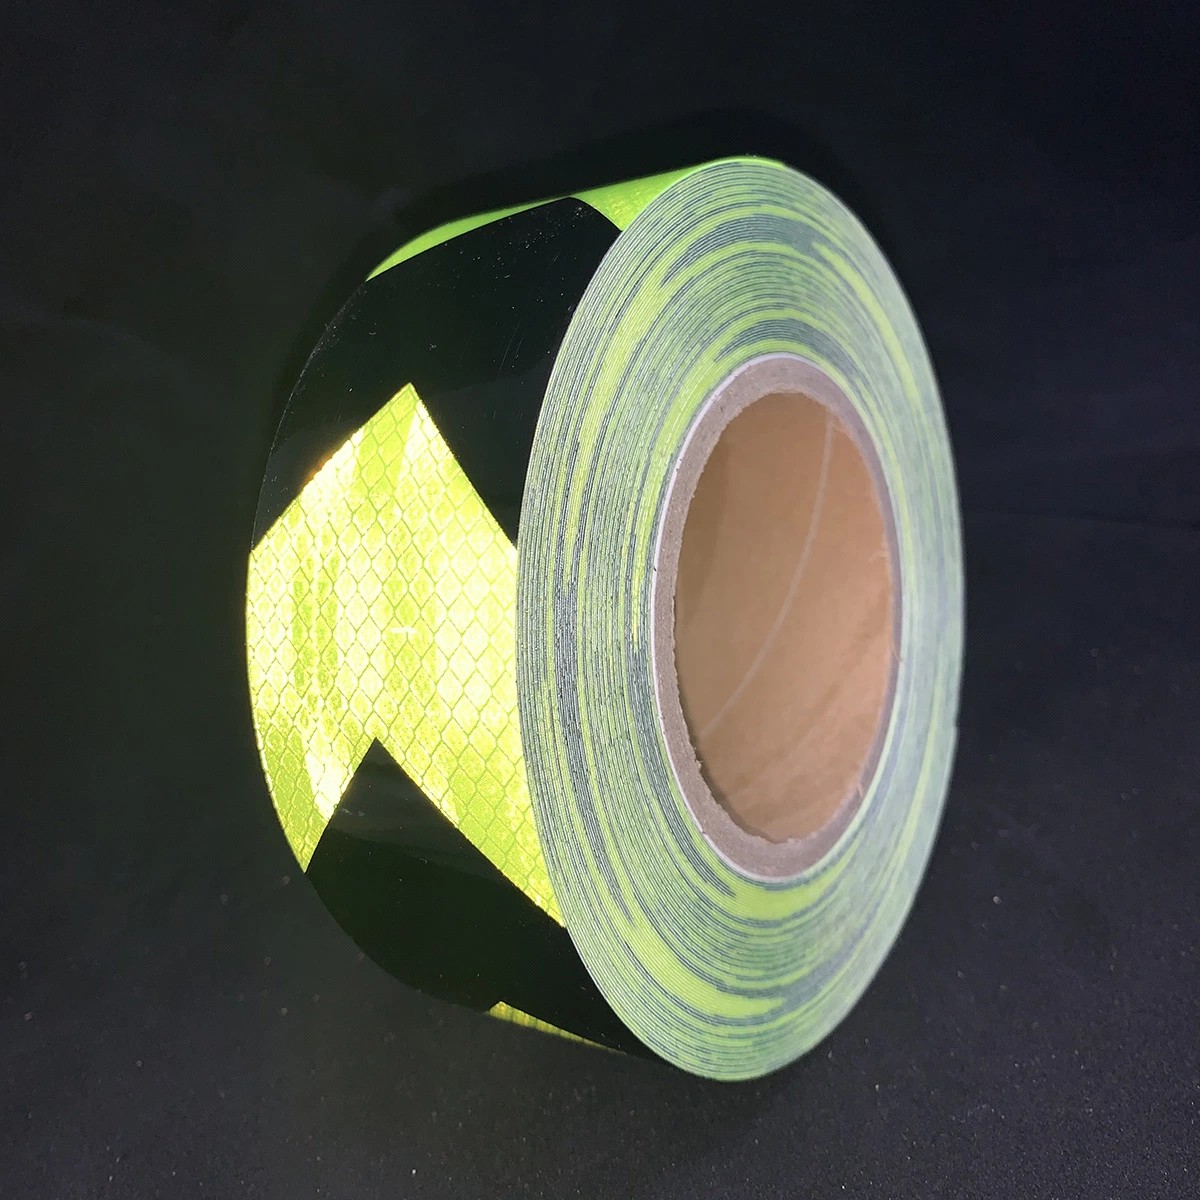 Black and Fluo Green Truck Arrow Reflective Safety Sticker Roll Pet Waterproof Outdoor Conspicuity Tape for Vehicles, Trailers, Boats, Signs